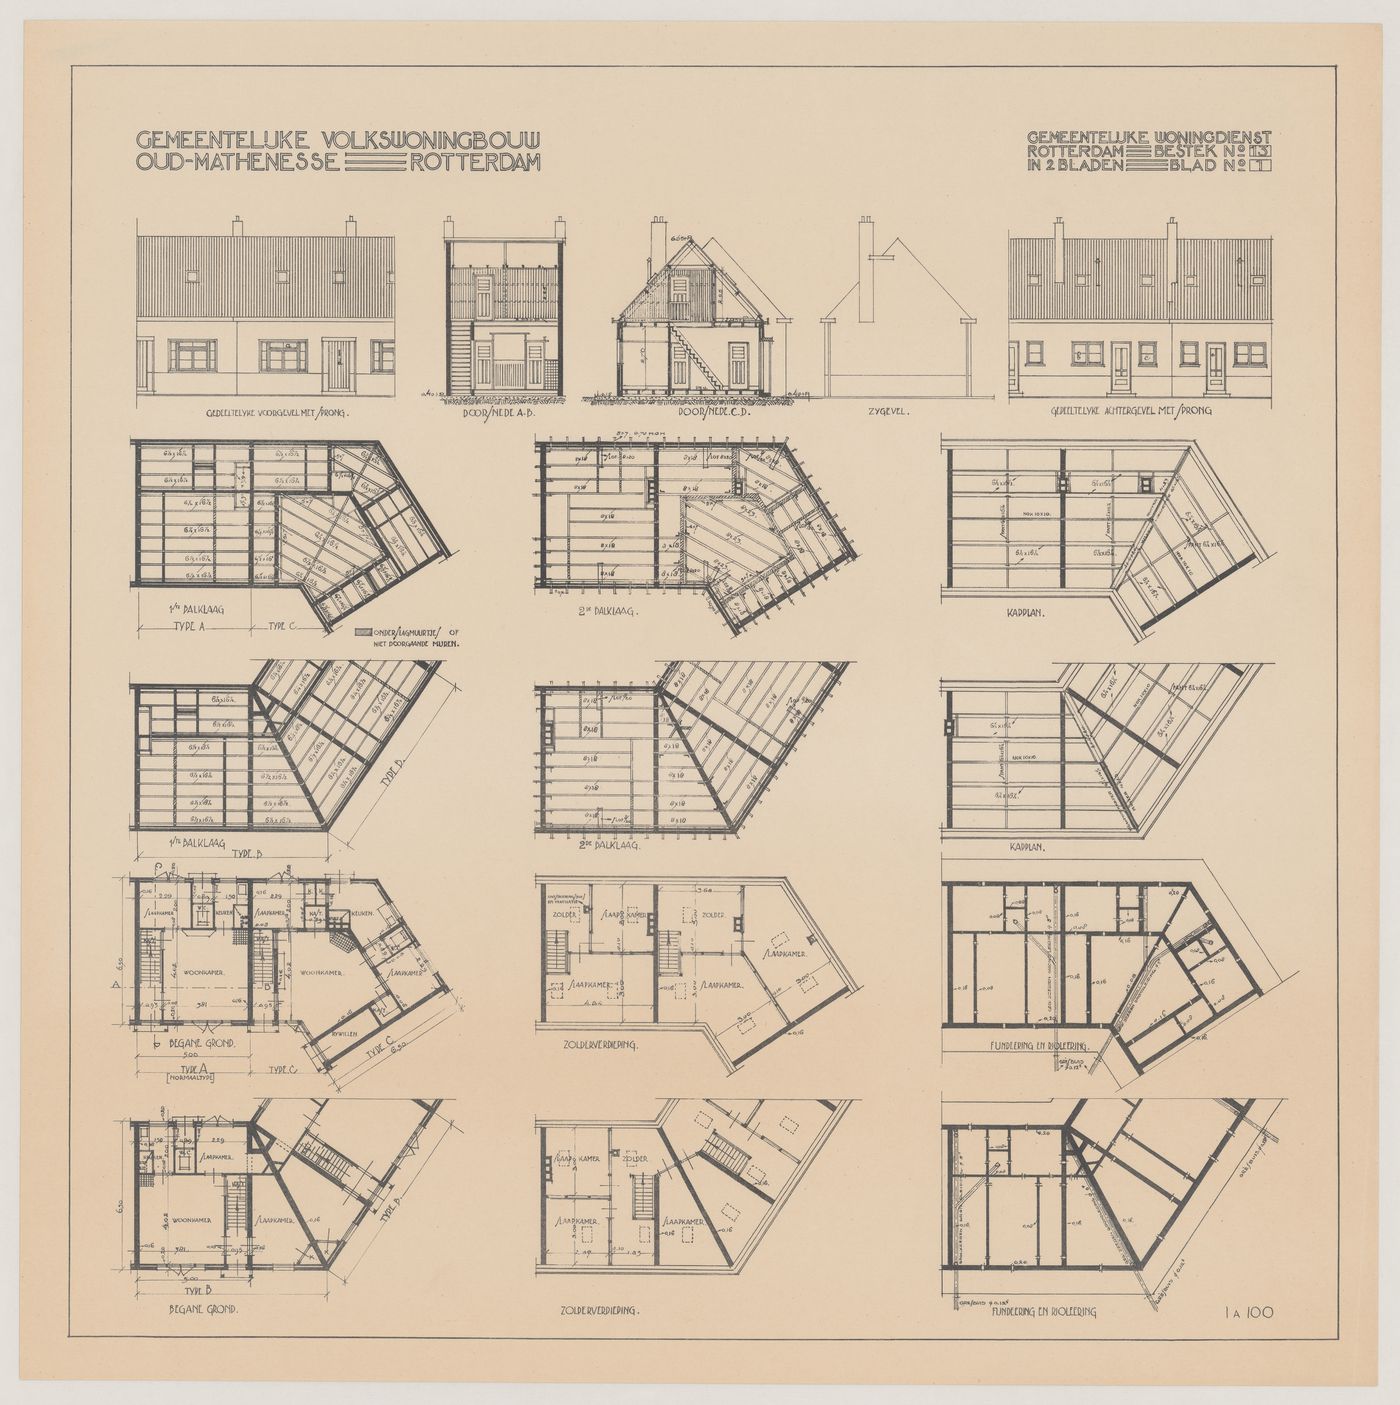 Foundation, floor and framing plans, elevations, and sections for Oud-Mathenesse Housing Estate, Rotterdam, Netherlands